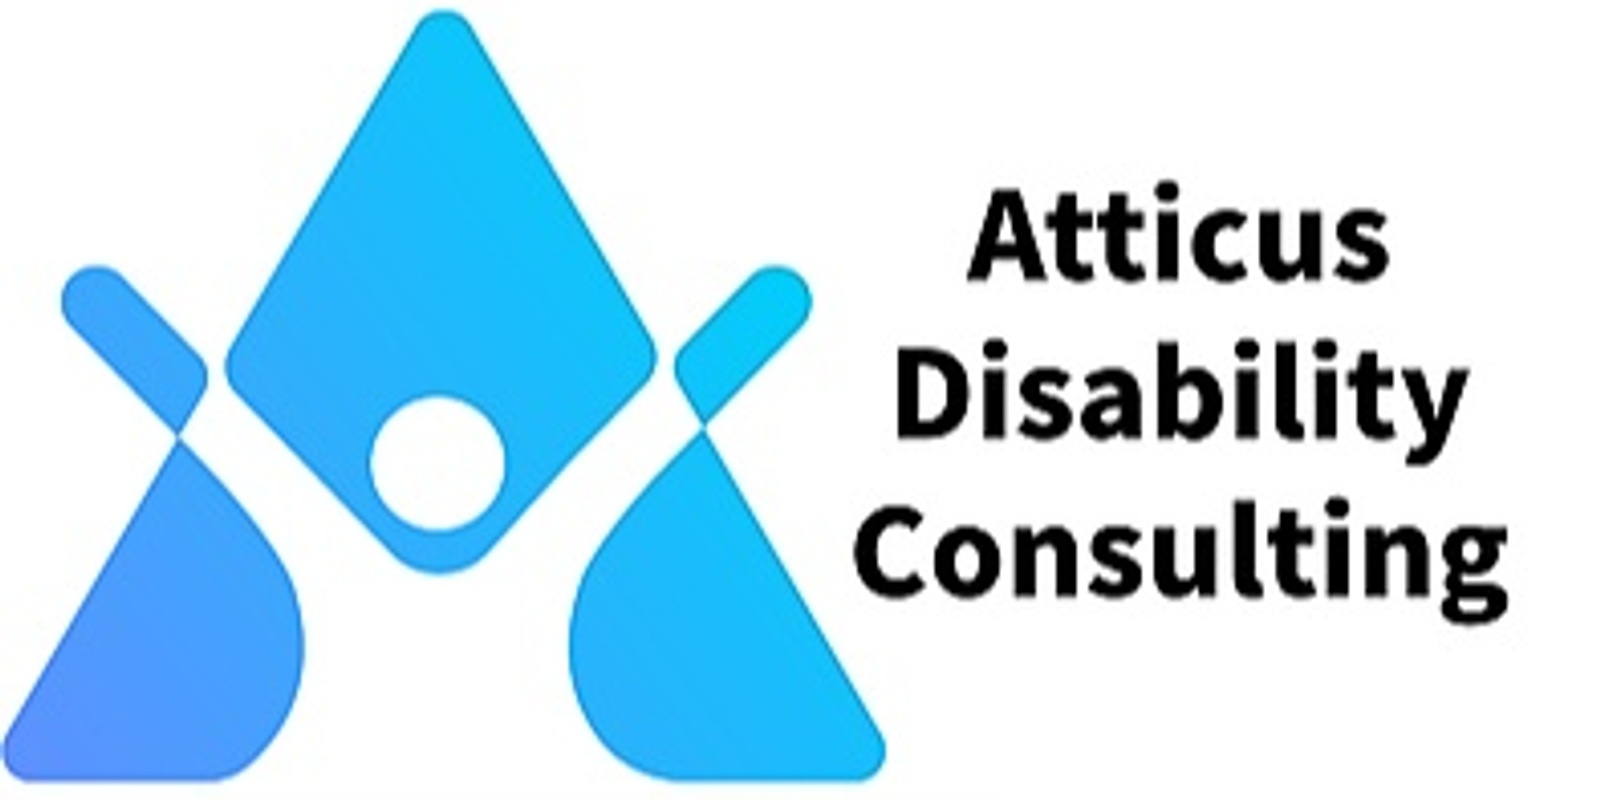 Atticus Disability Consulting's banner